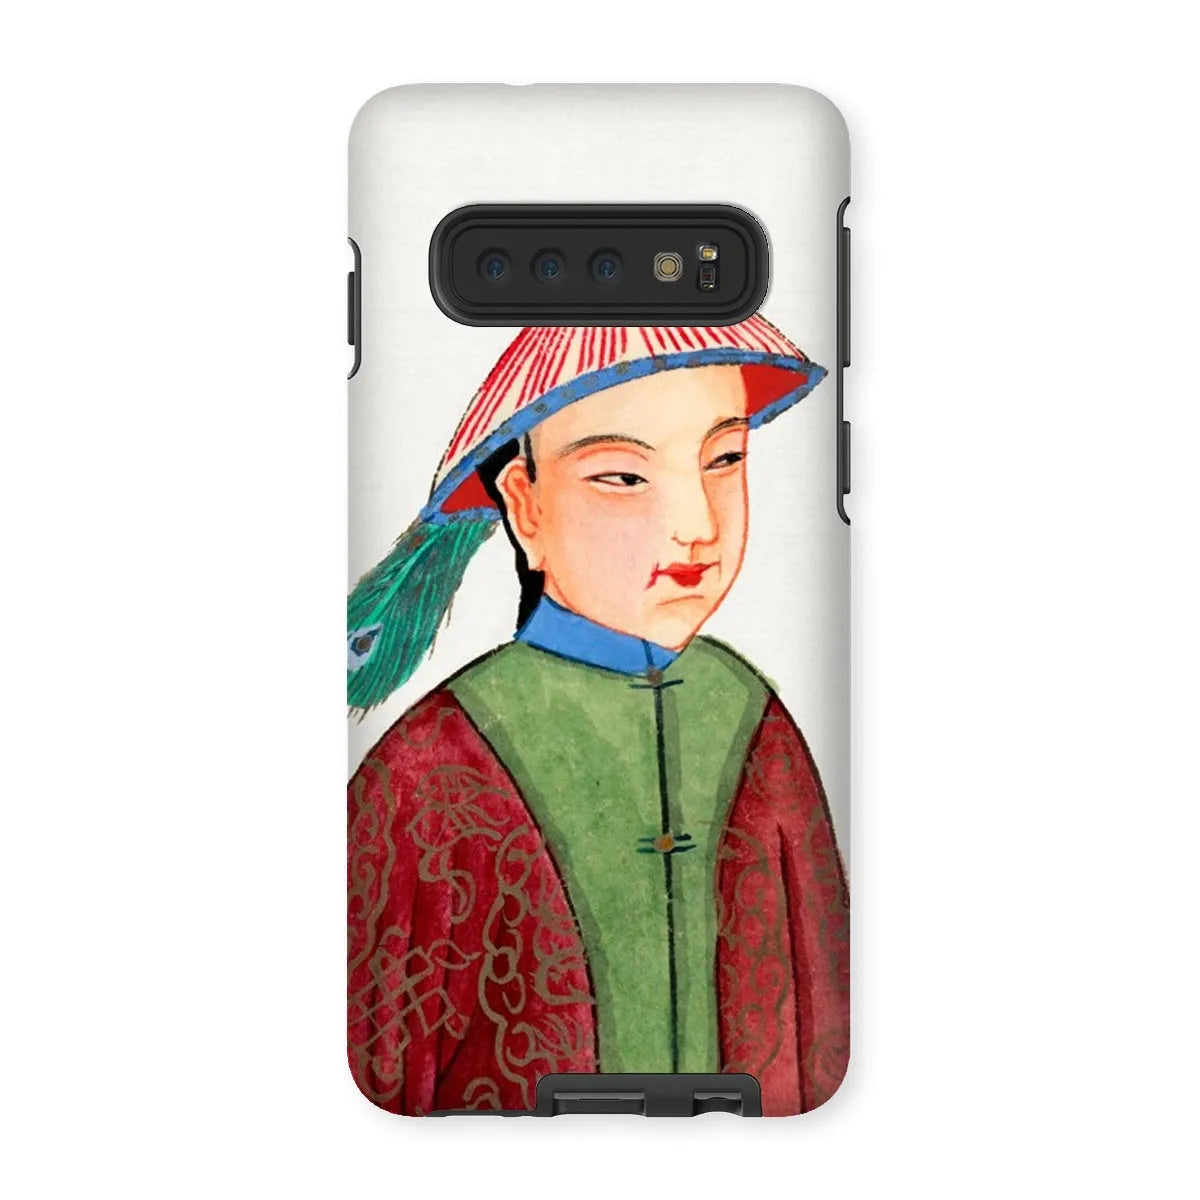 Manchu Dandy - Chinese Aesthetic Art Phone Case - Samsung Galaxy S10 / Matte - Mobile Phone Cases - Aesthetic Art